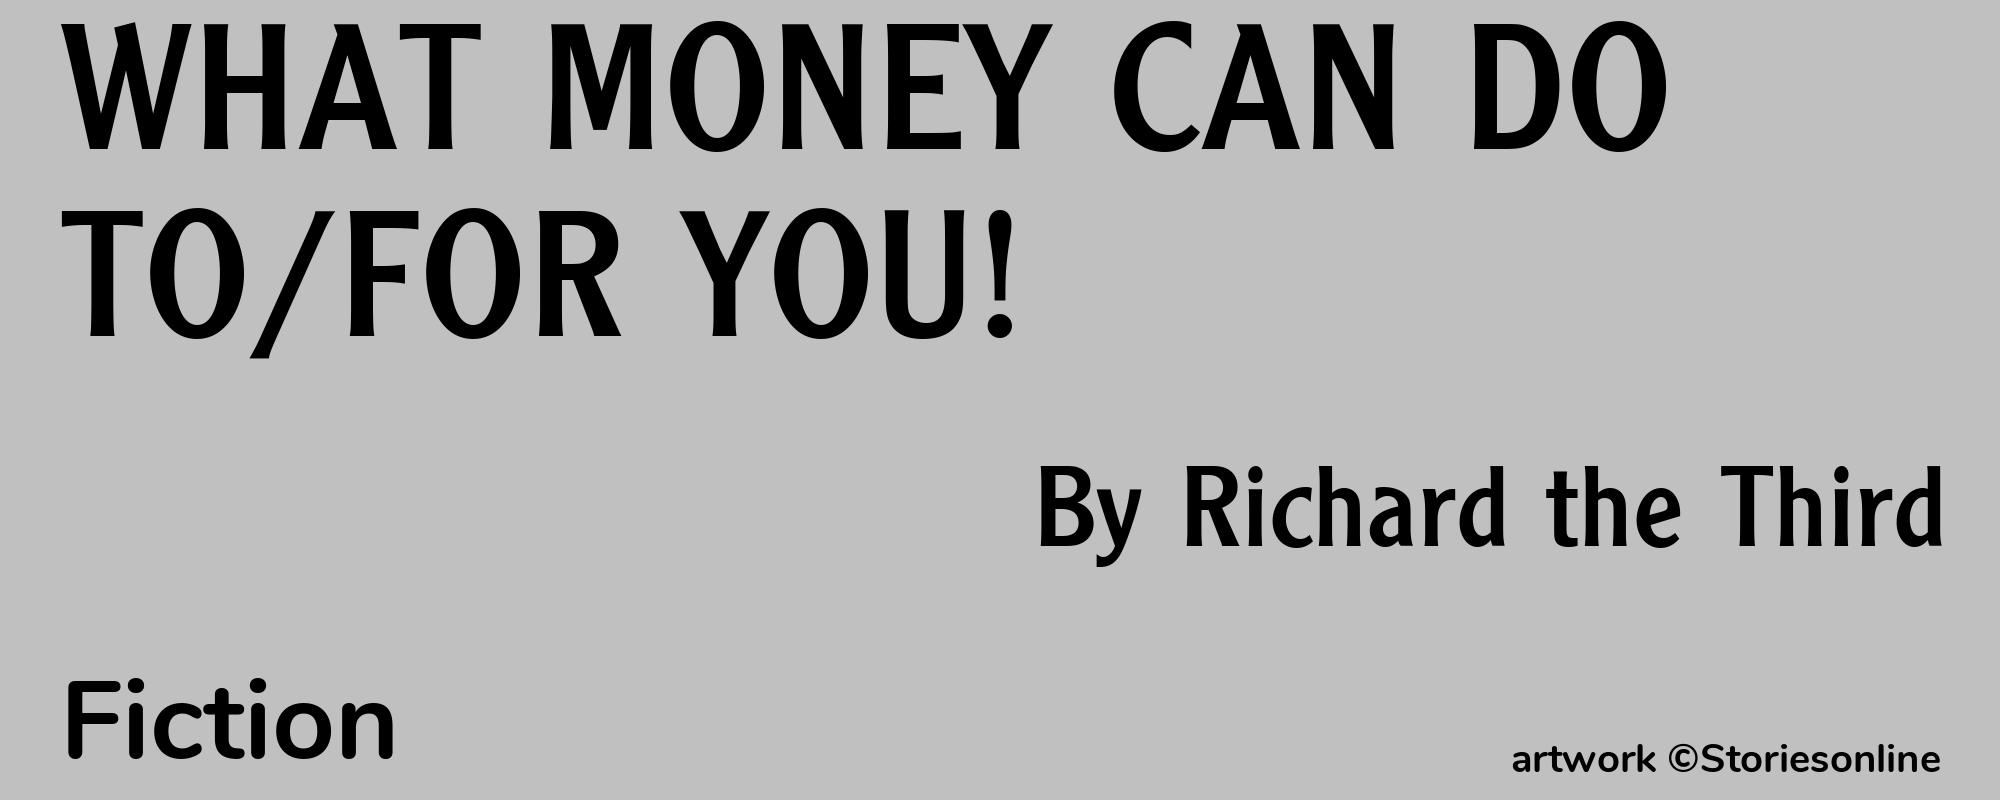 WHAT MONEY CAN DO TO/FOR YOU! - Cover